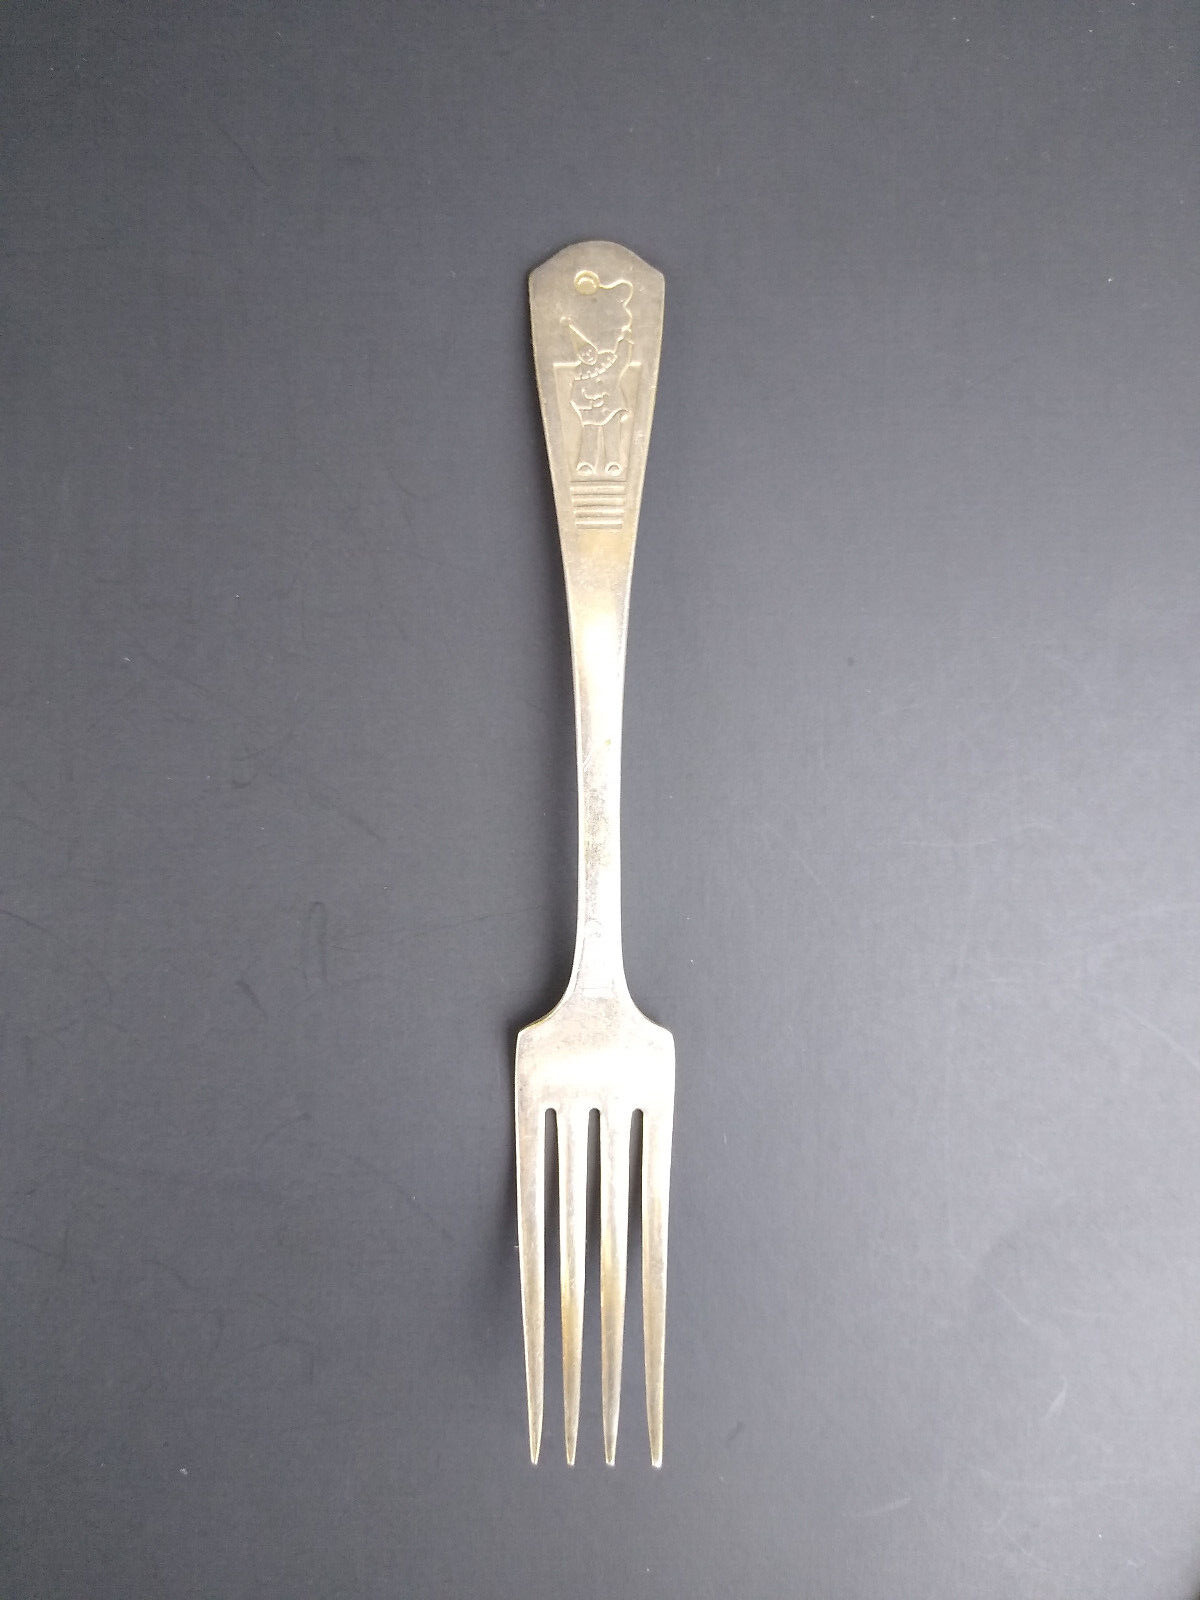 Childs Clown Fork 1930s Silver Plate Imperial Silverplate Vintage 5\